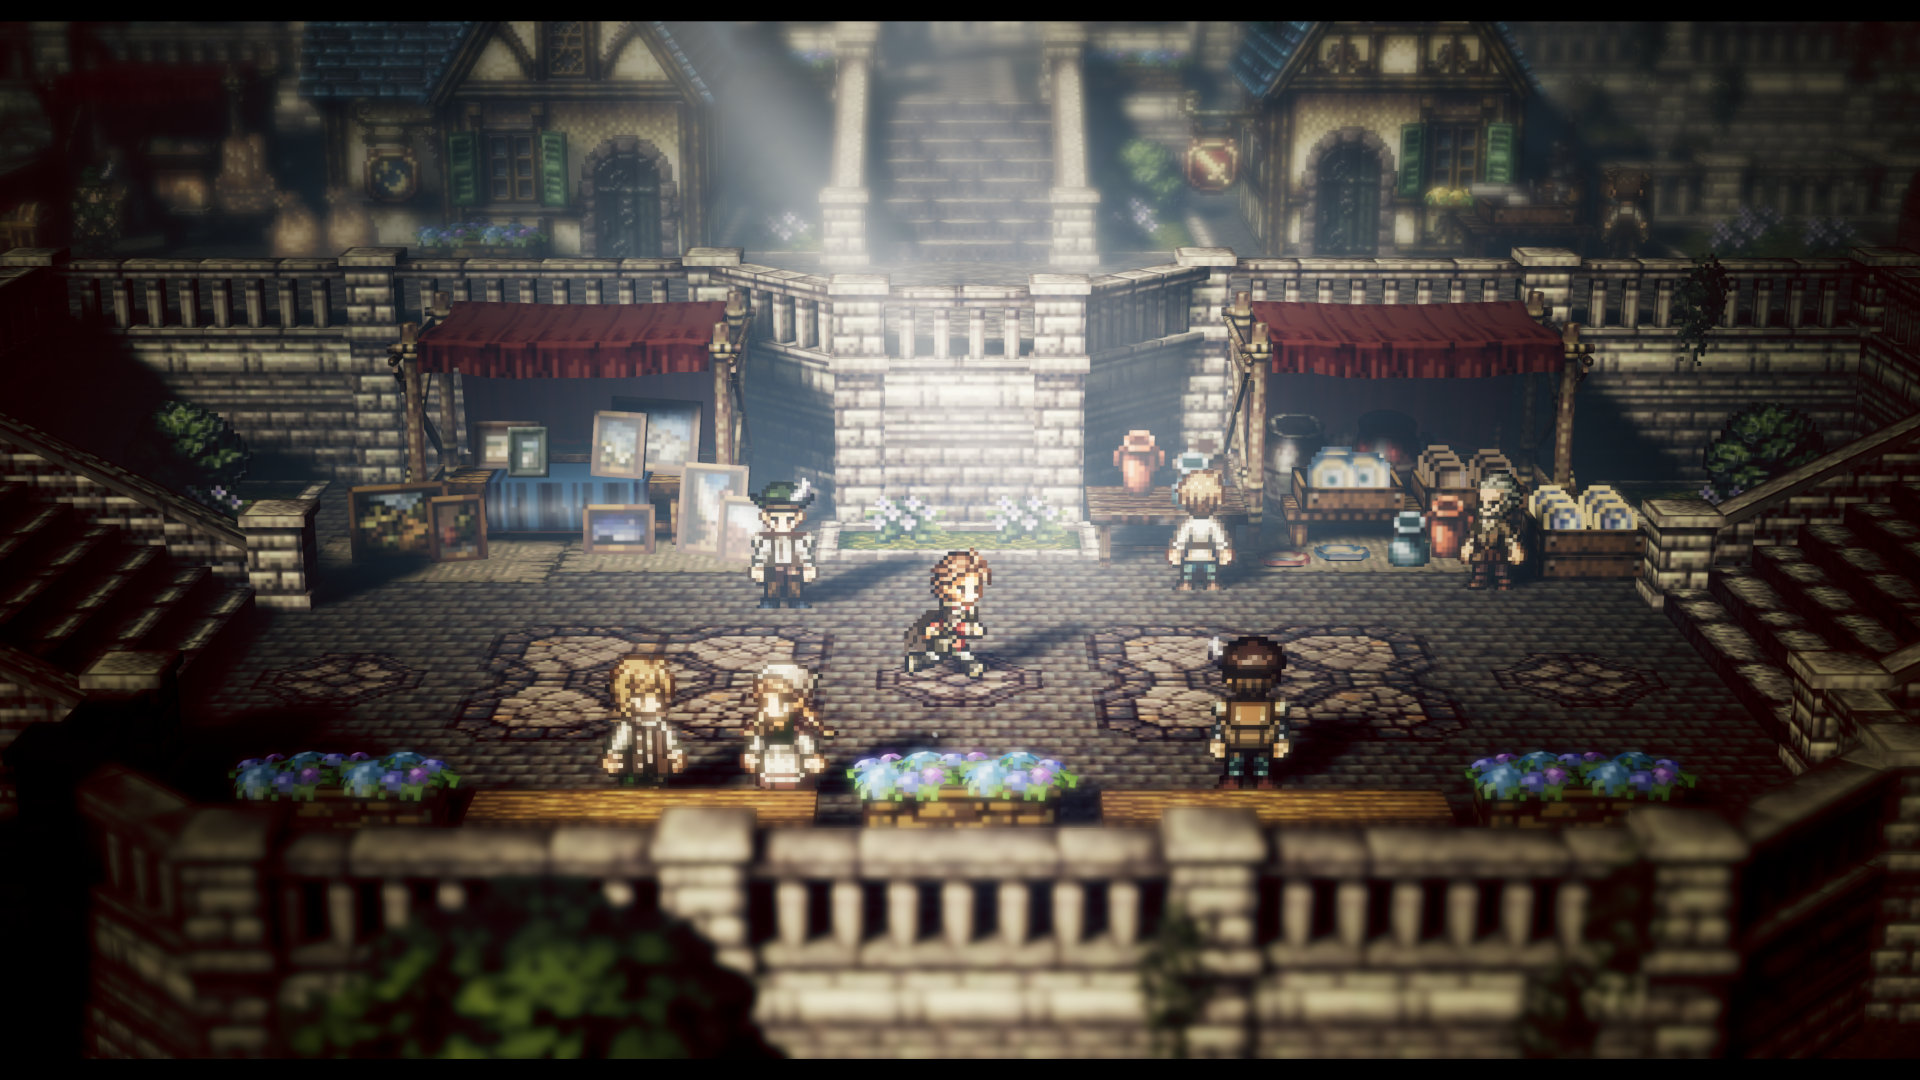 Octopath Traveler - Champions of the Continent, another mobile game that  could be a console game